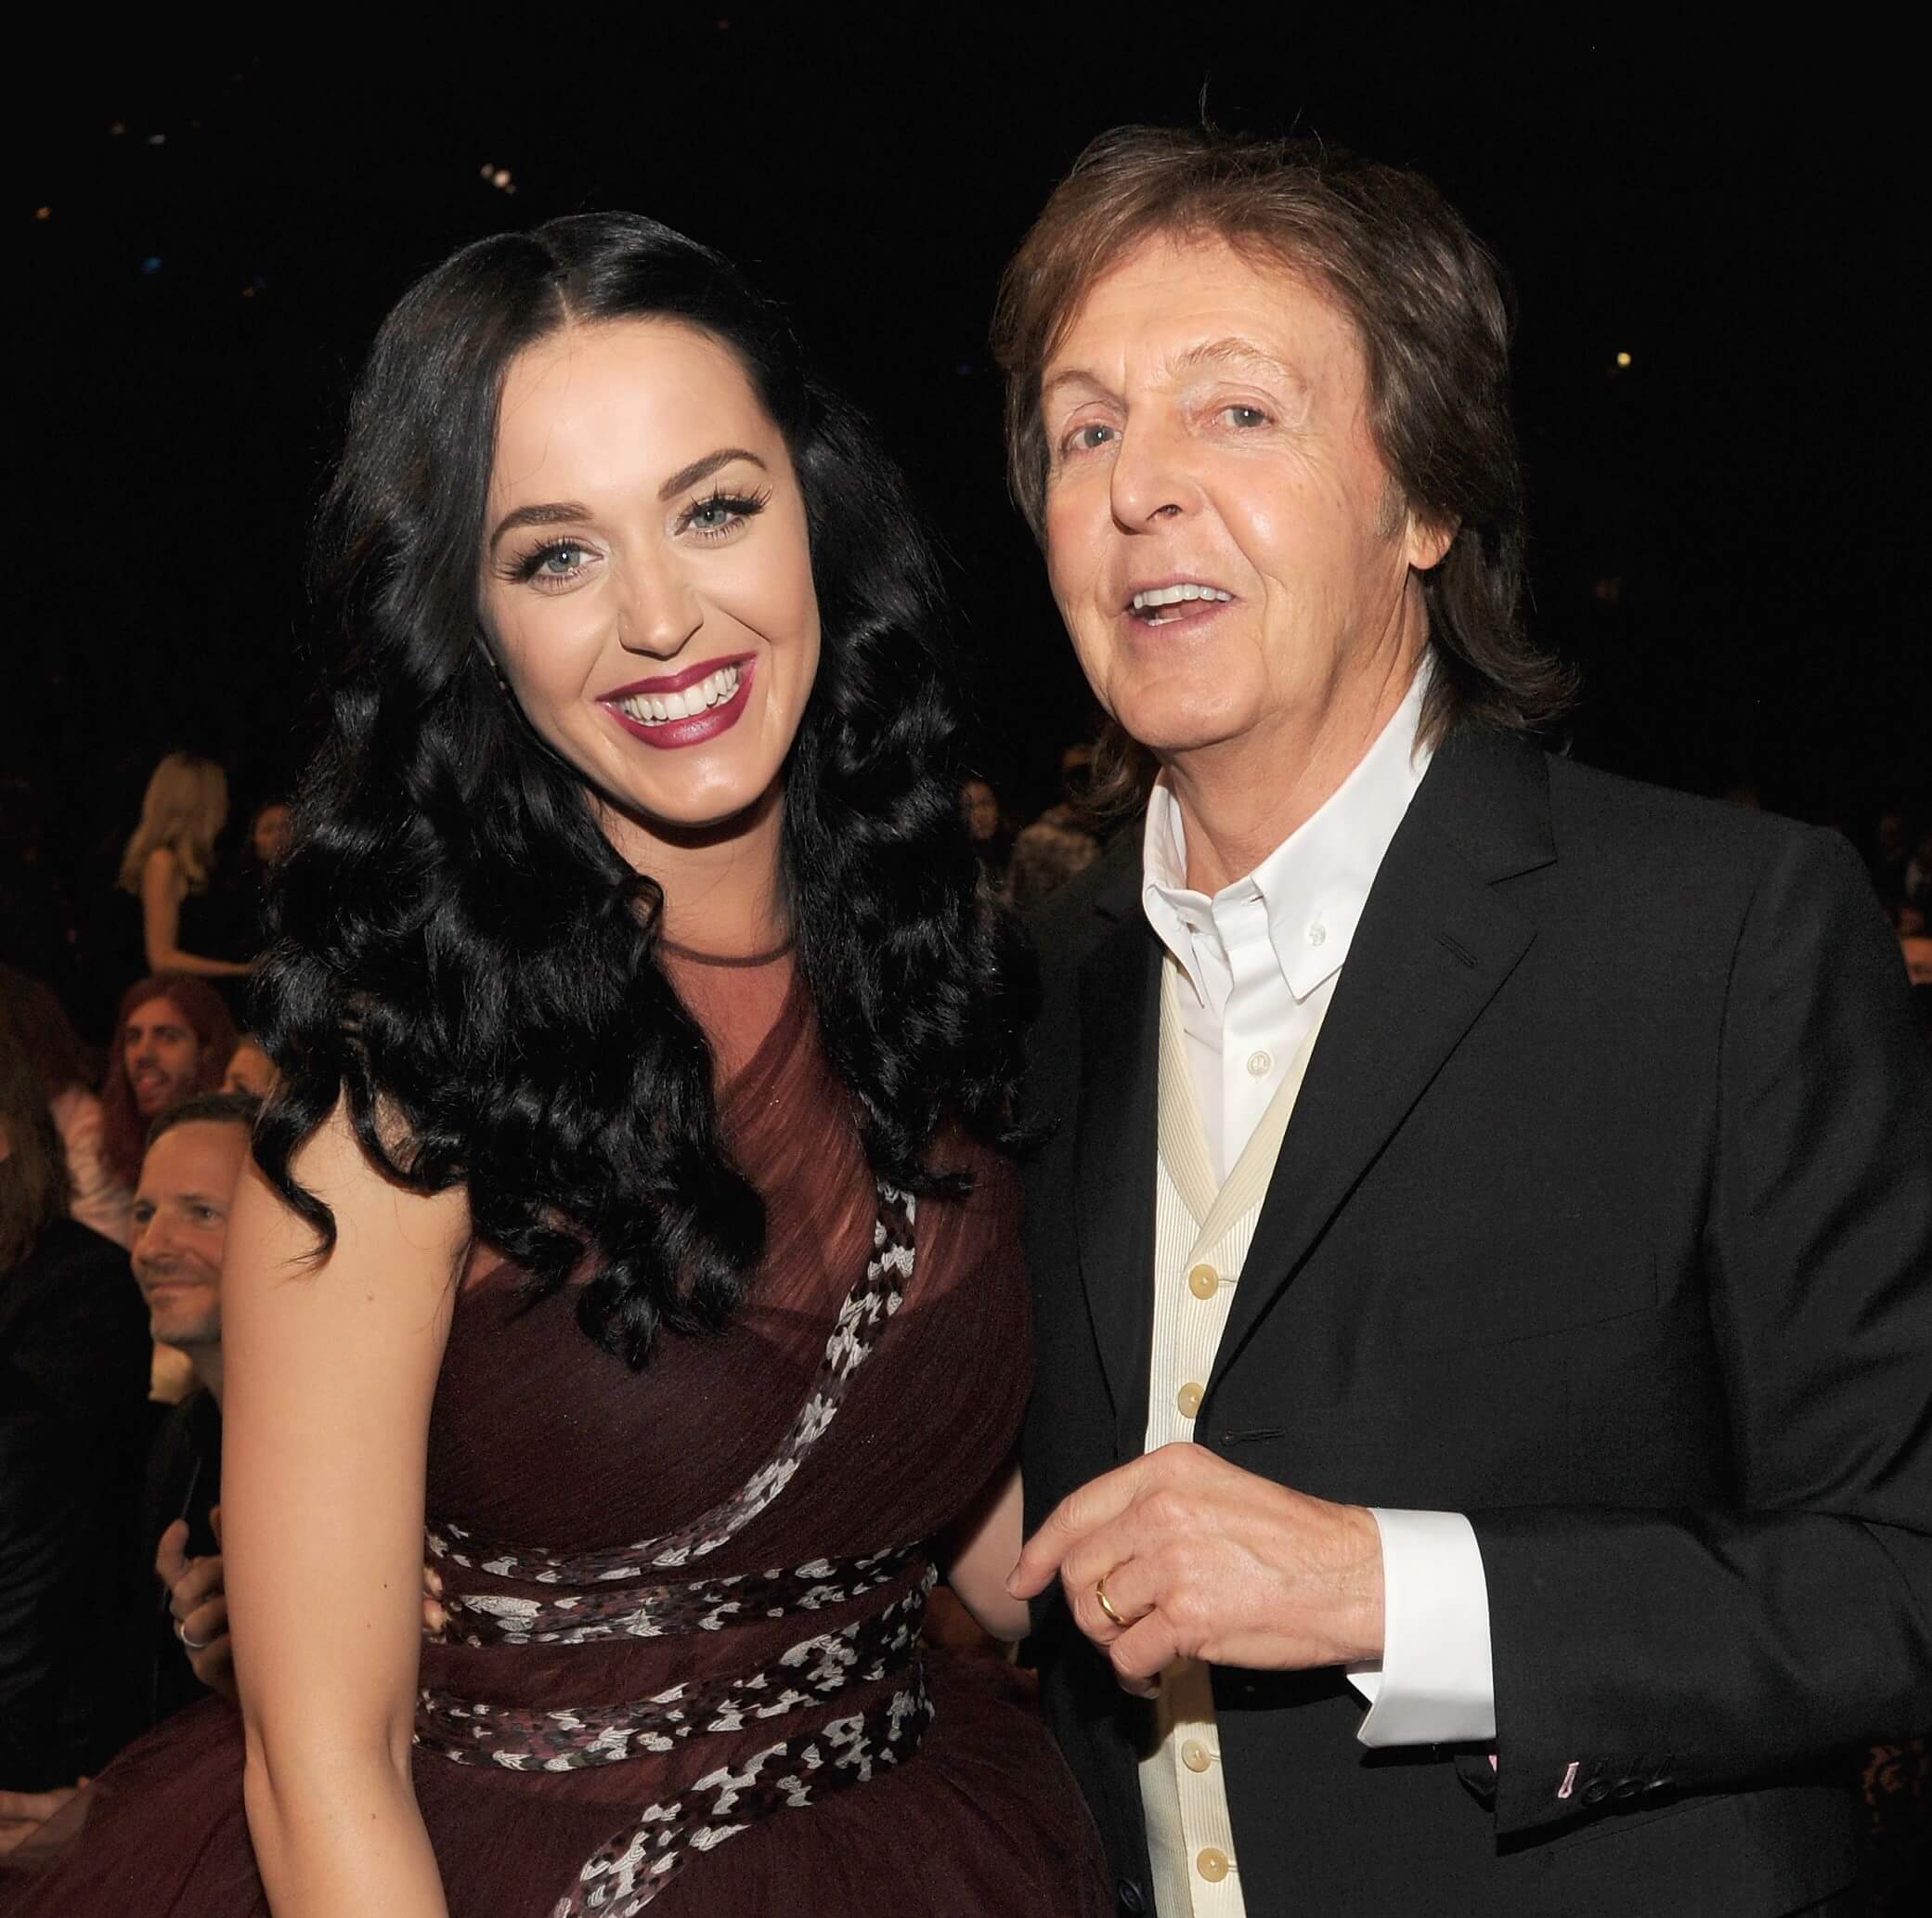 Katy Perry and Paul McCartney smiling